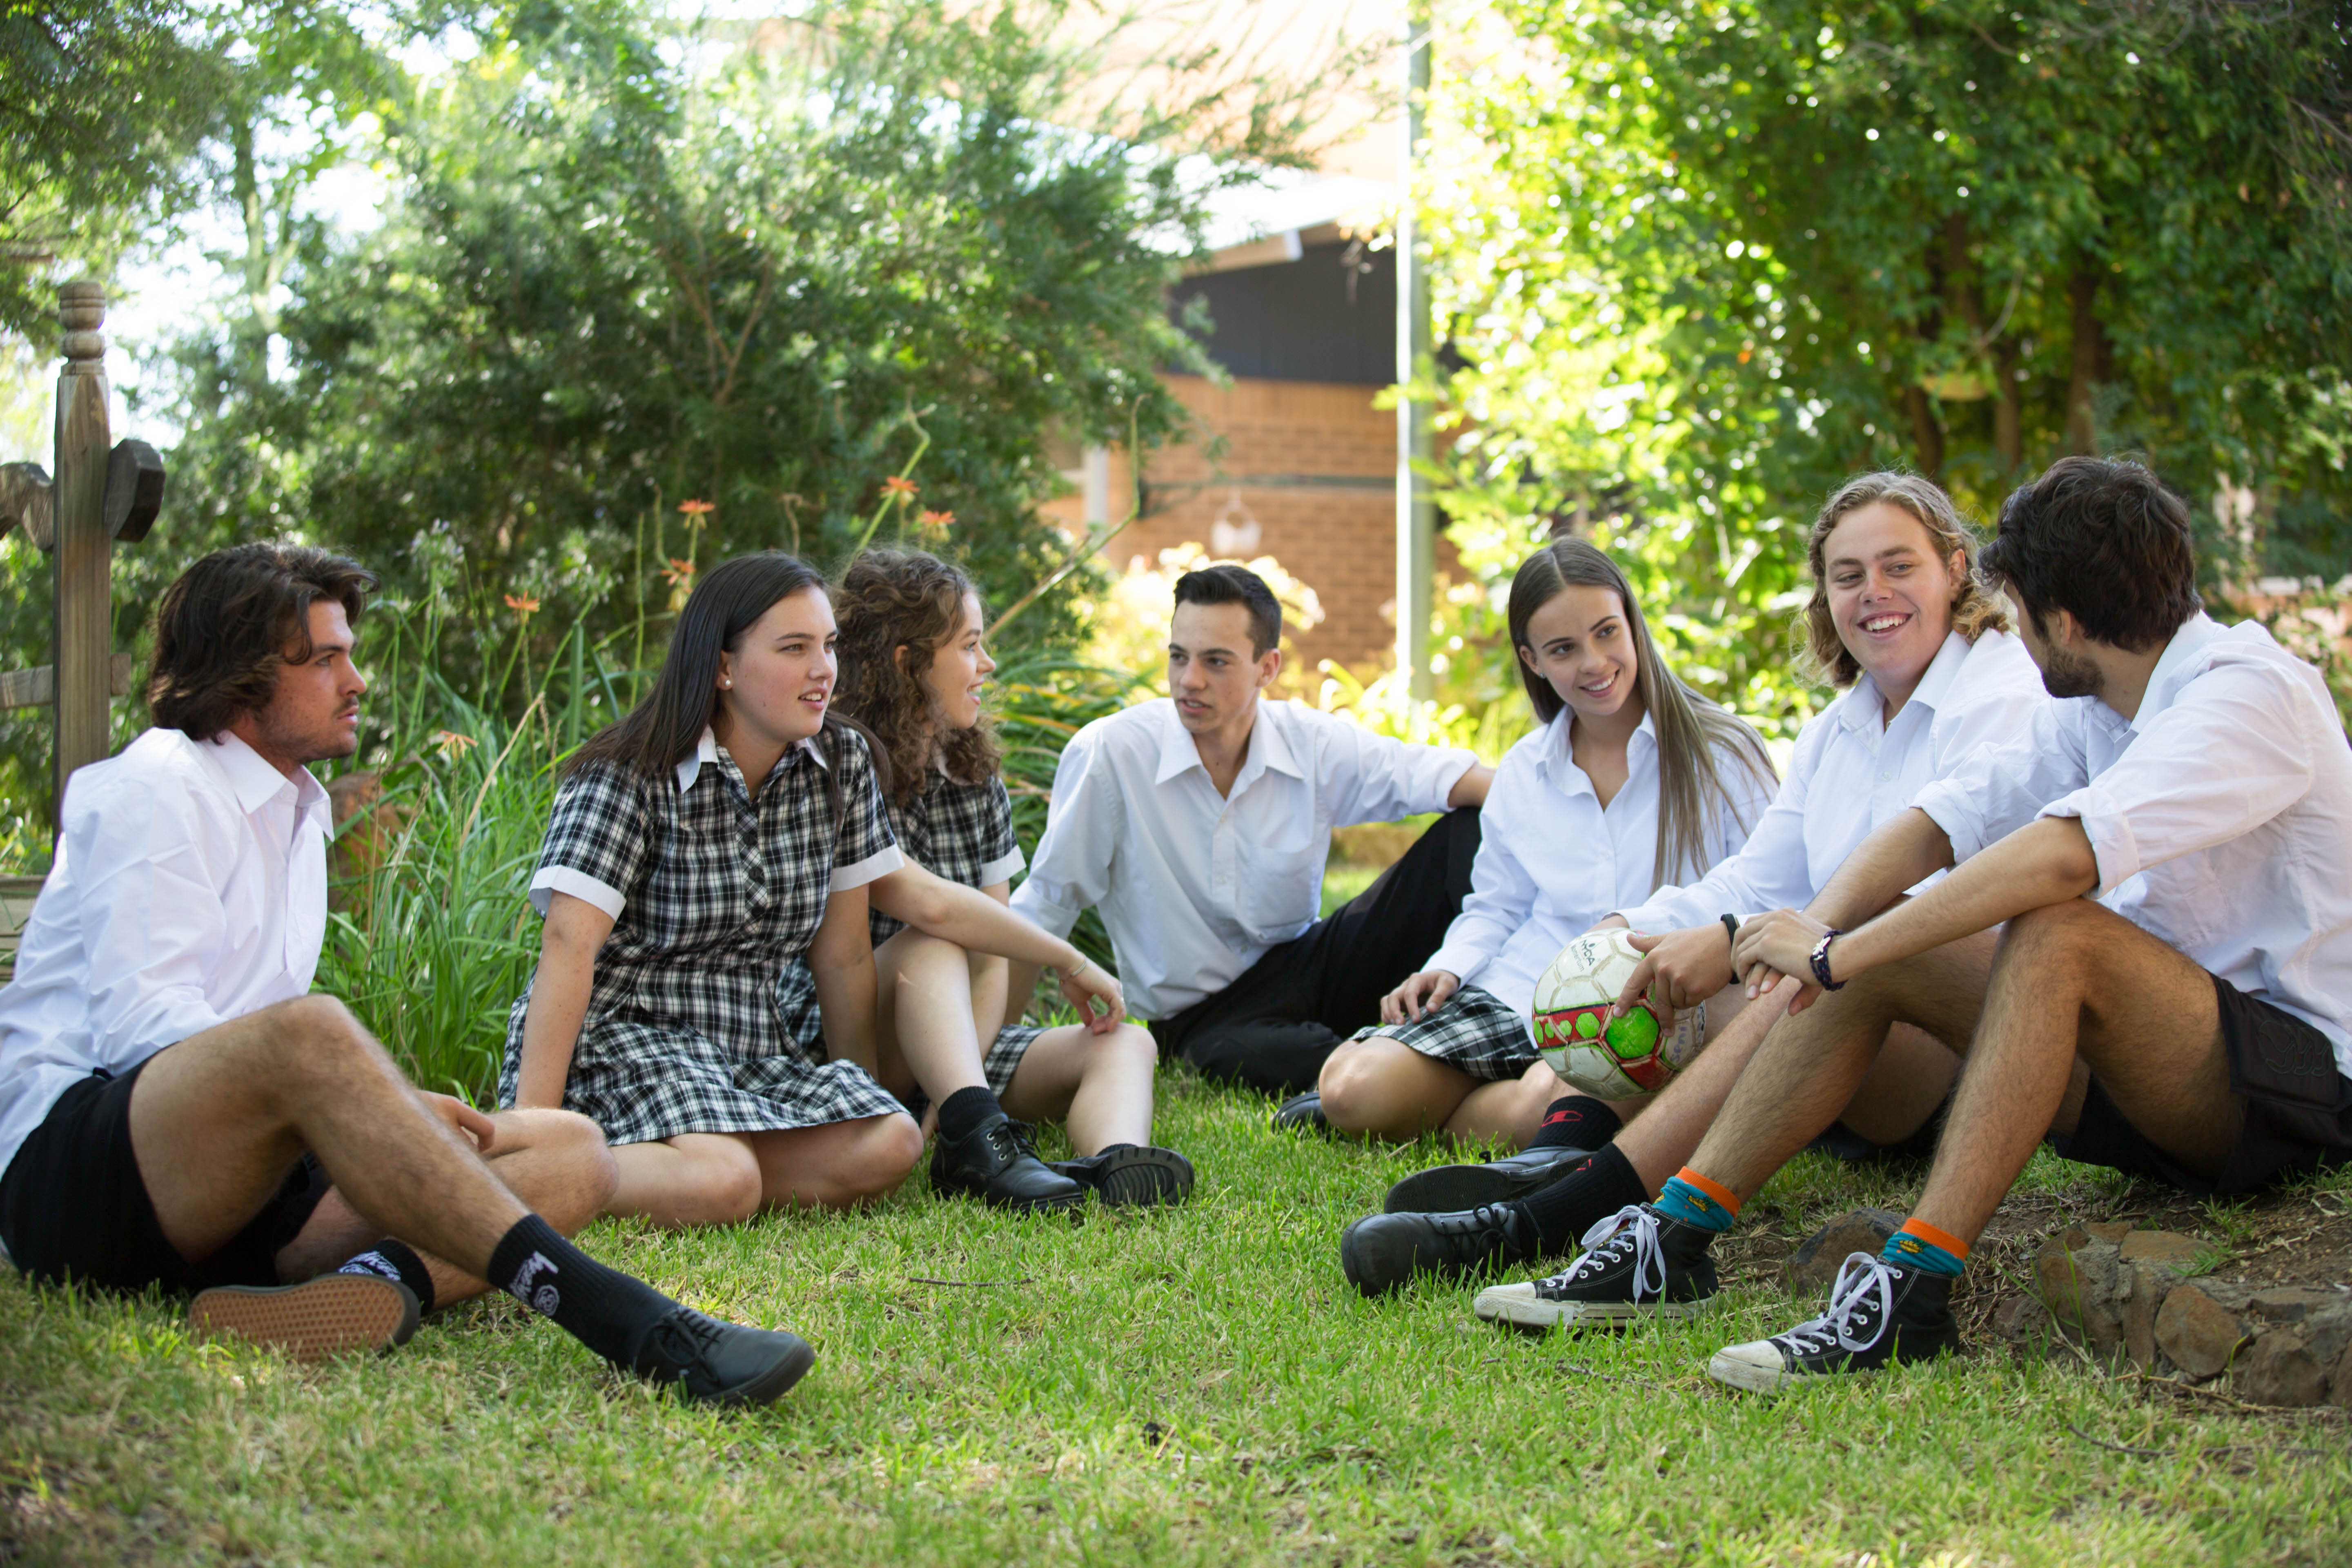 A group of teenagers sitting outside on grass, engaged in conversation